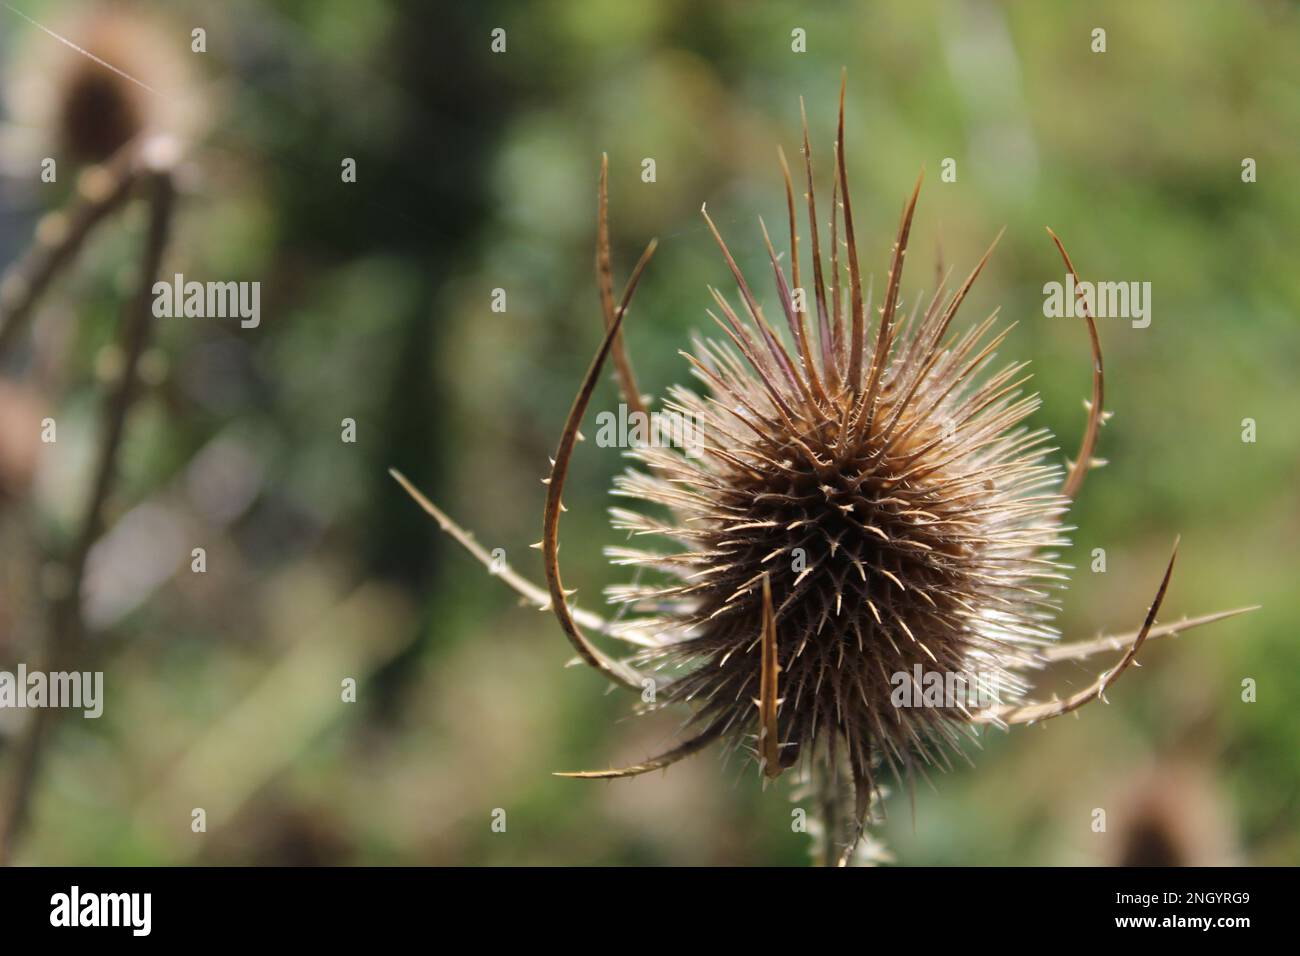 Dipsacus Laciniatus - egg-shaped head subtended by long bracts. Dried out, isolated teasle Stock Photo